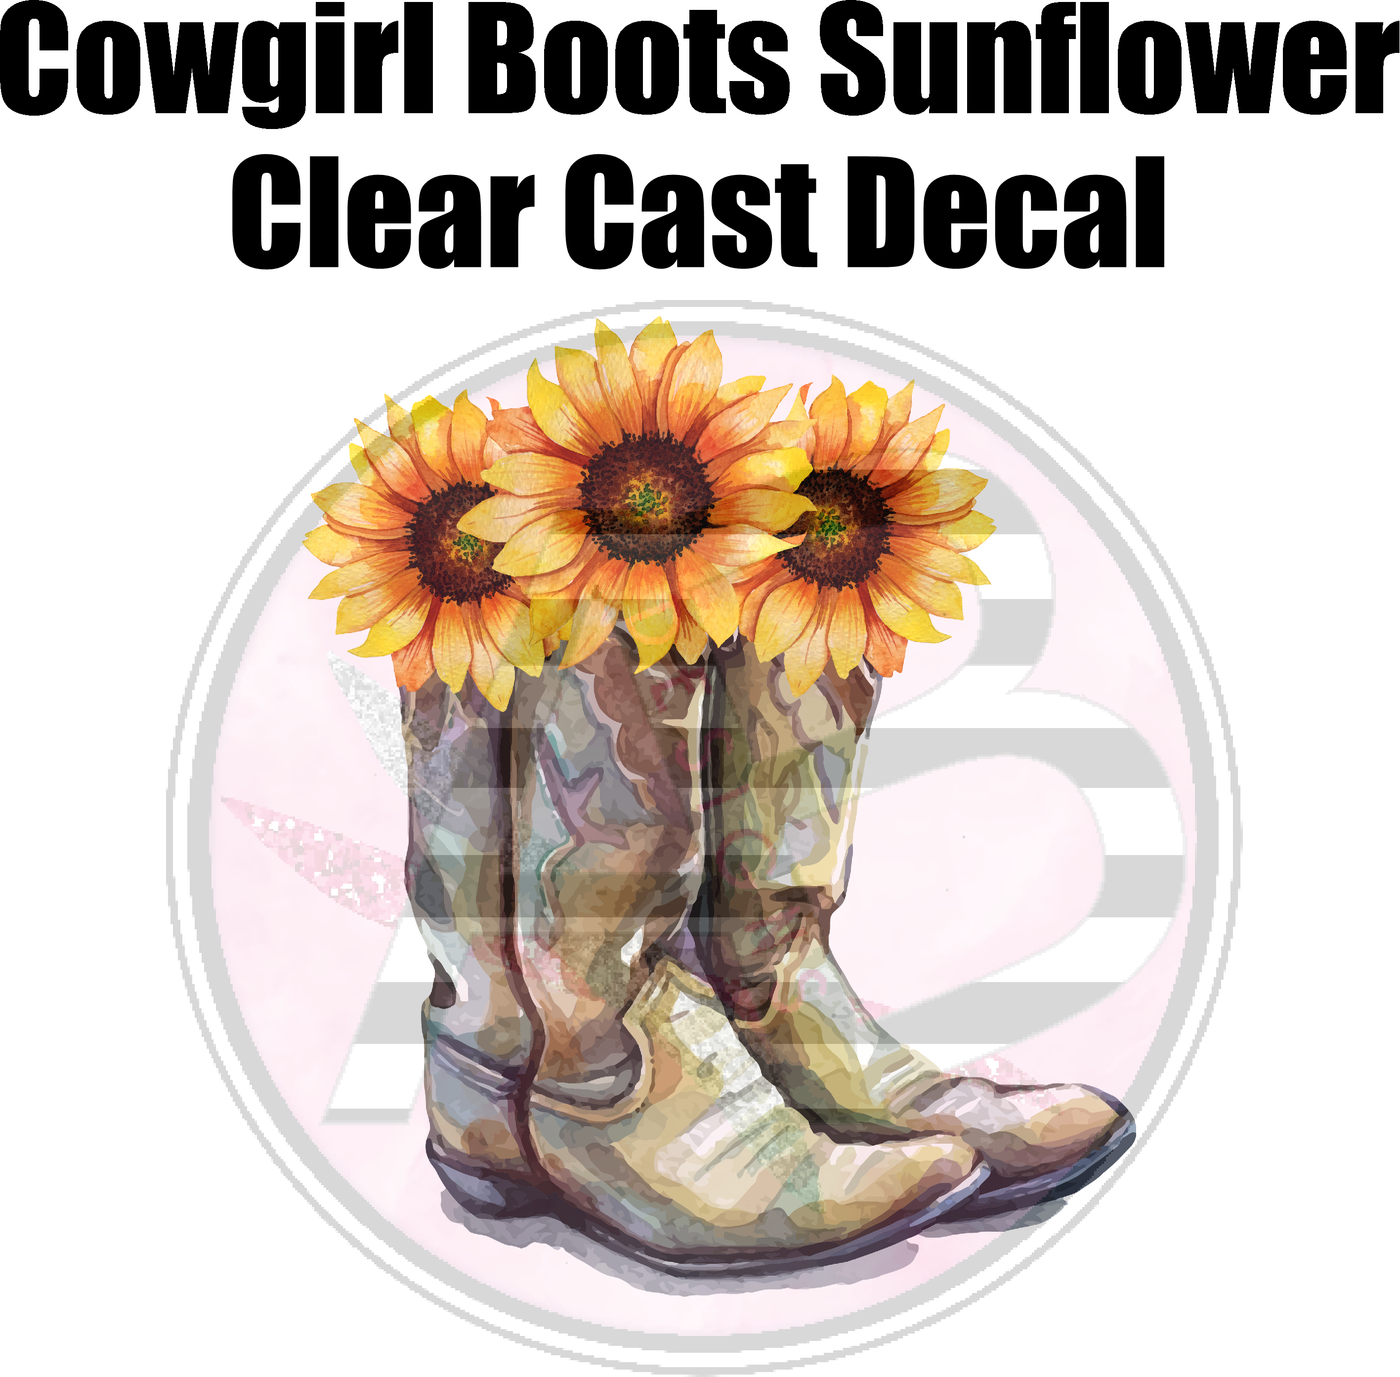 Cowgirl Boot Sunflower - Clear Cast Decal